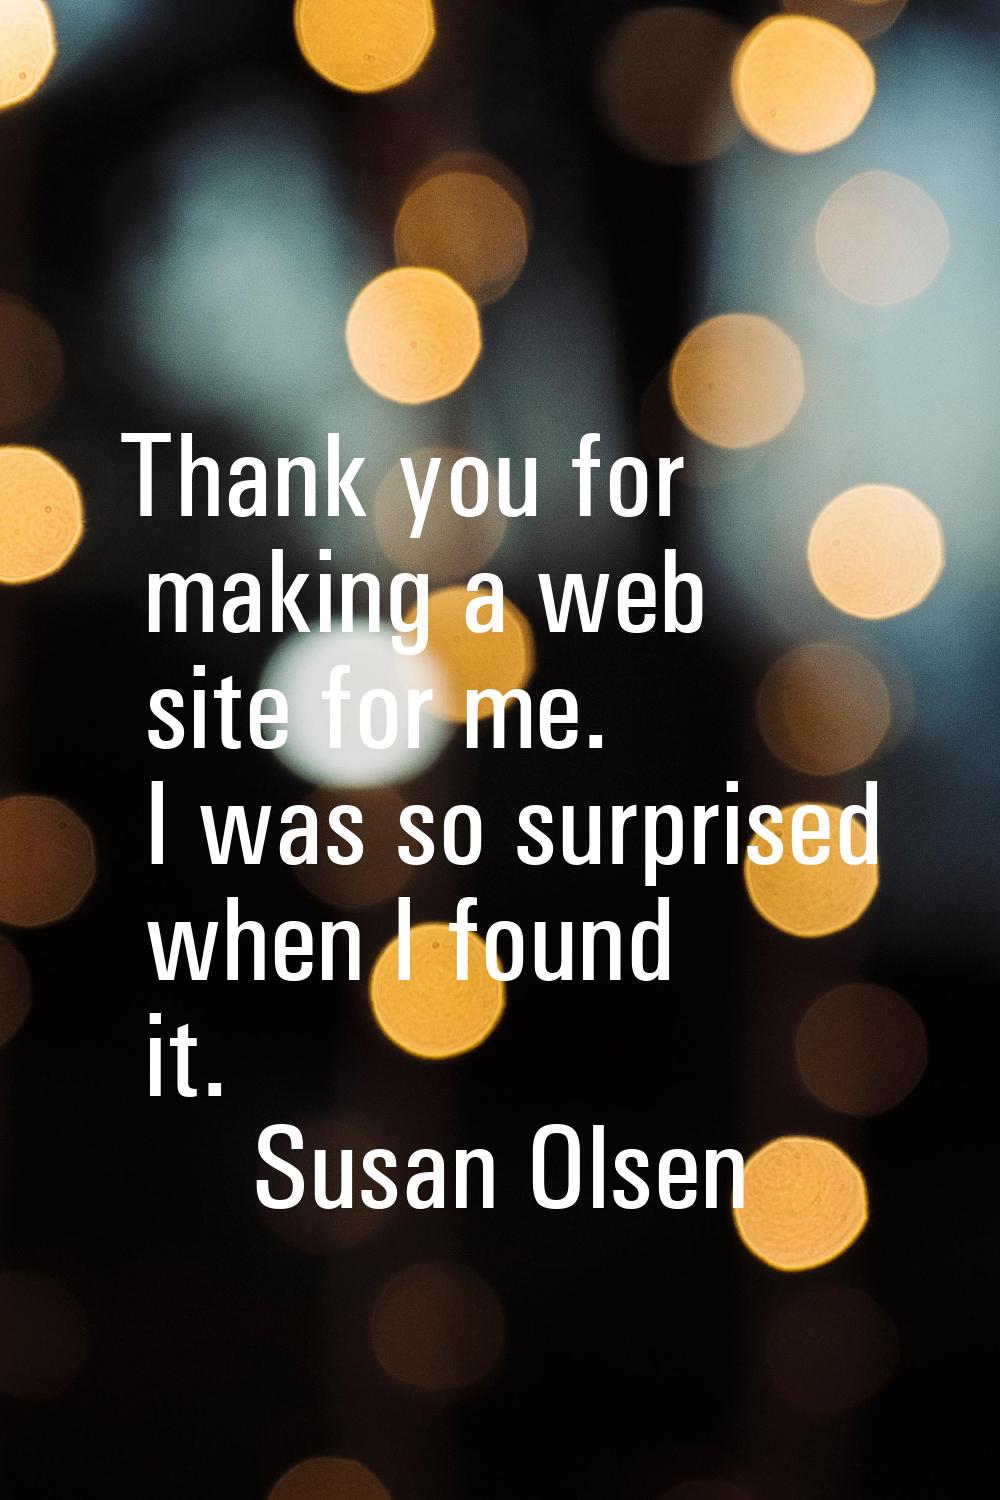 Thank you for making a web site for me. I was so surprised when I found it.